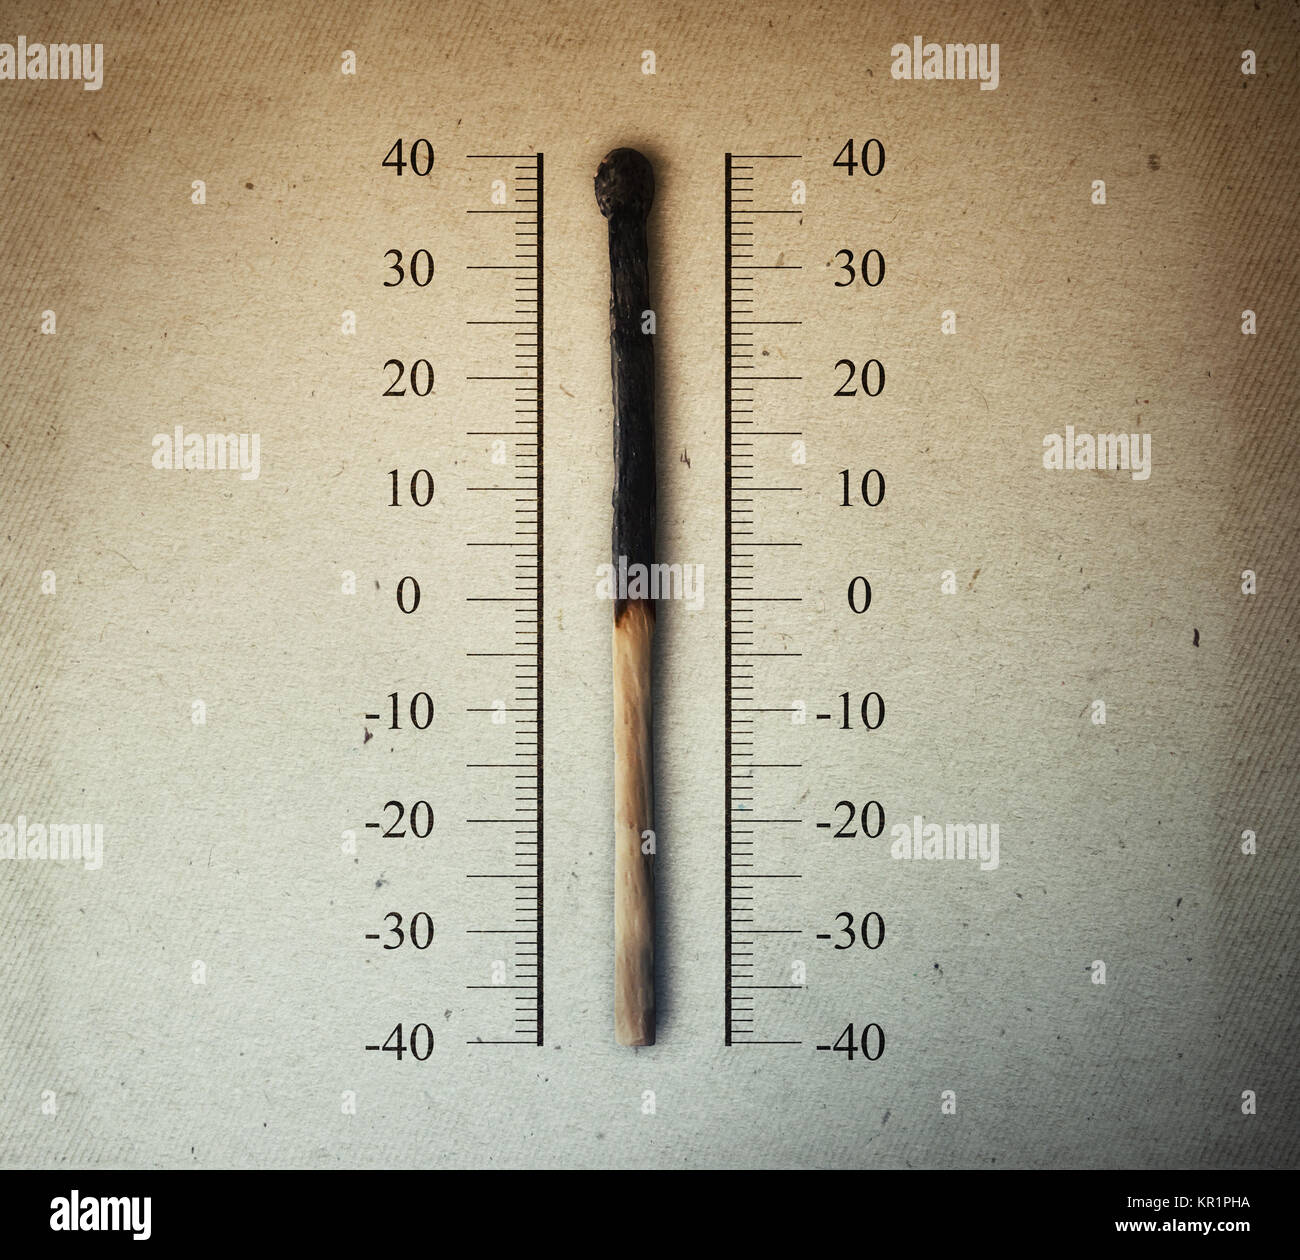 match thermometer Stock Photo